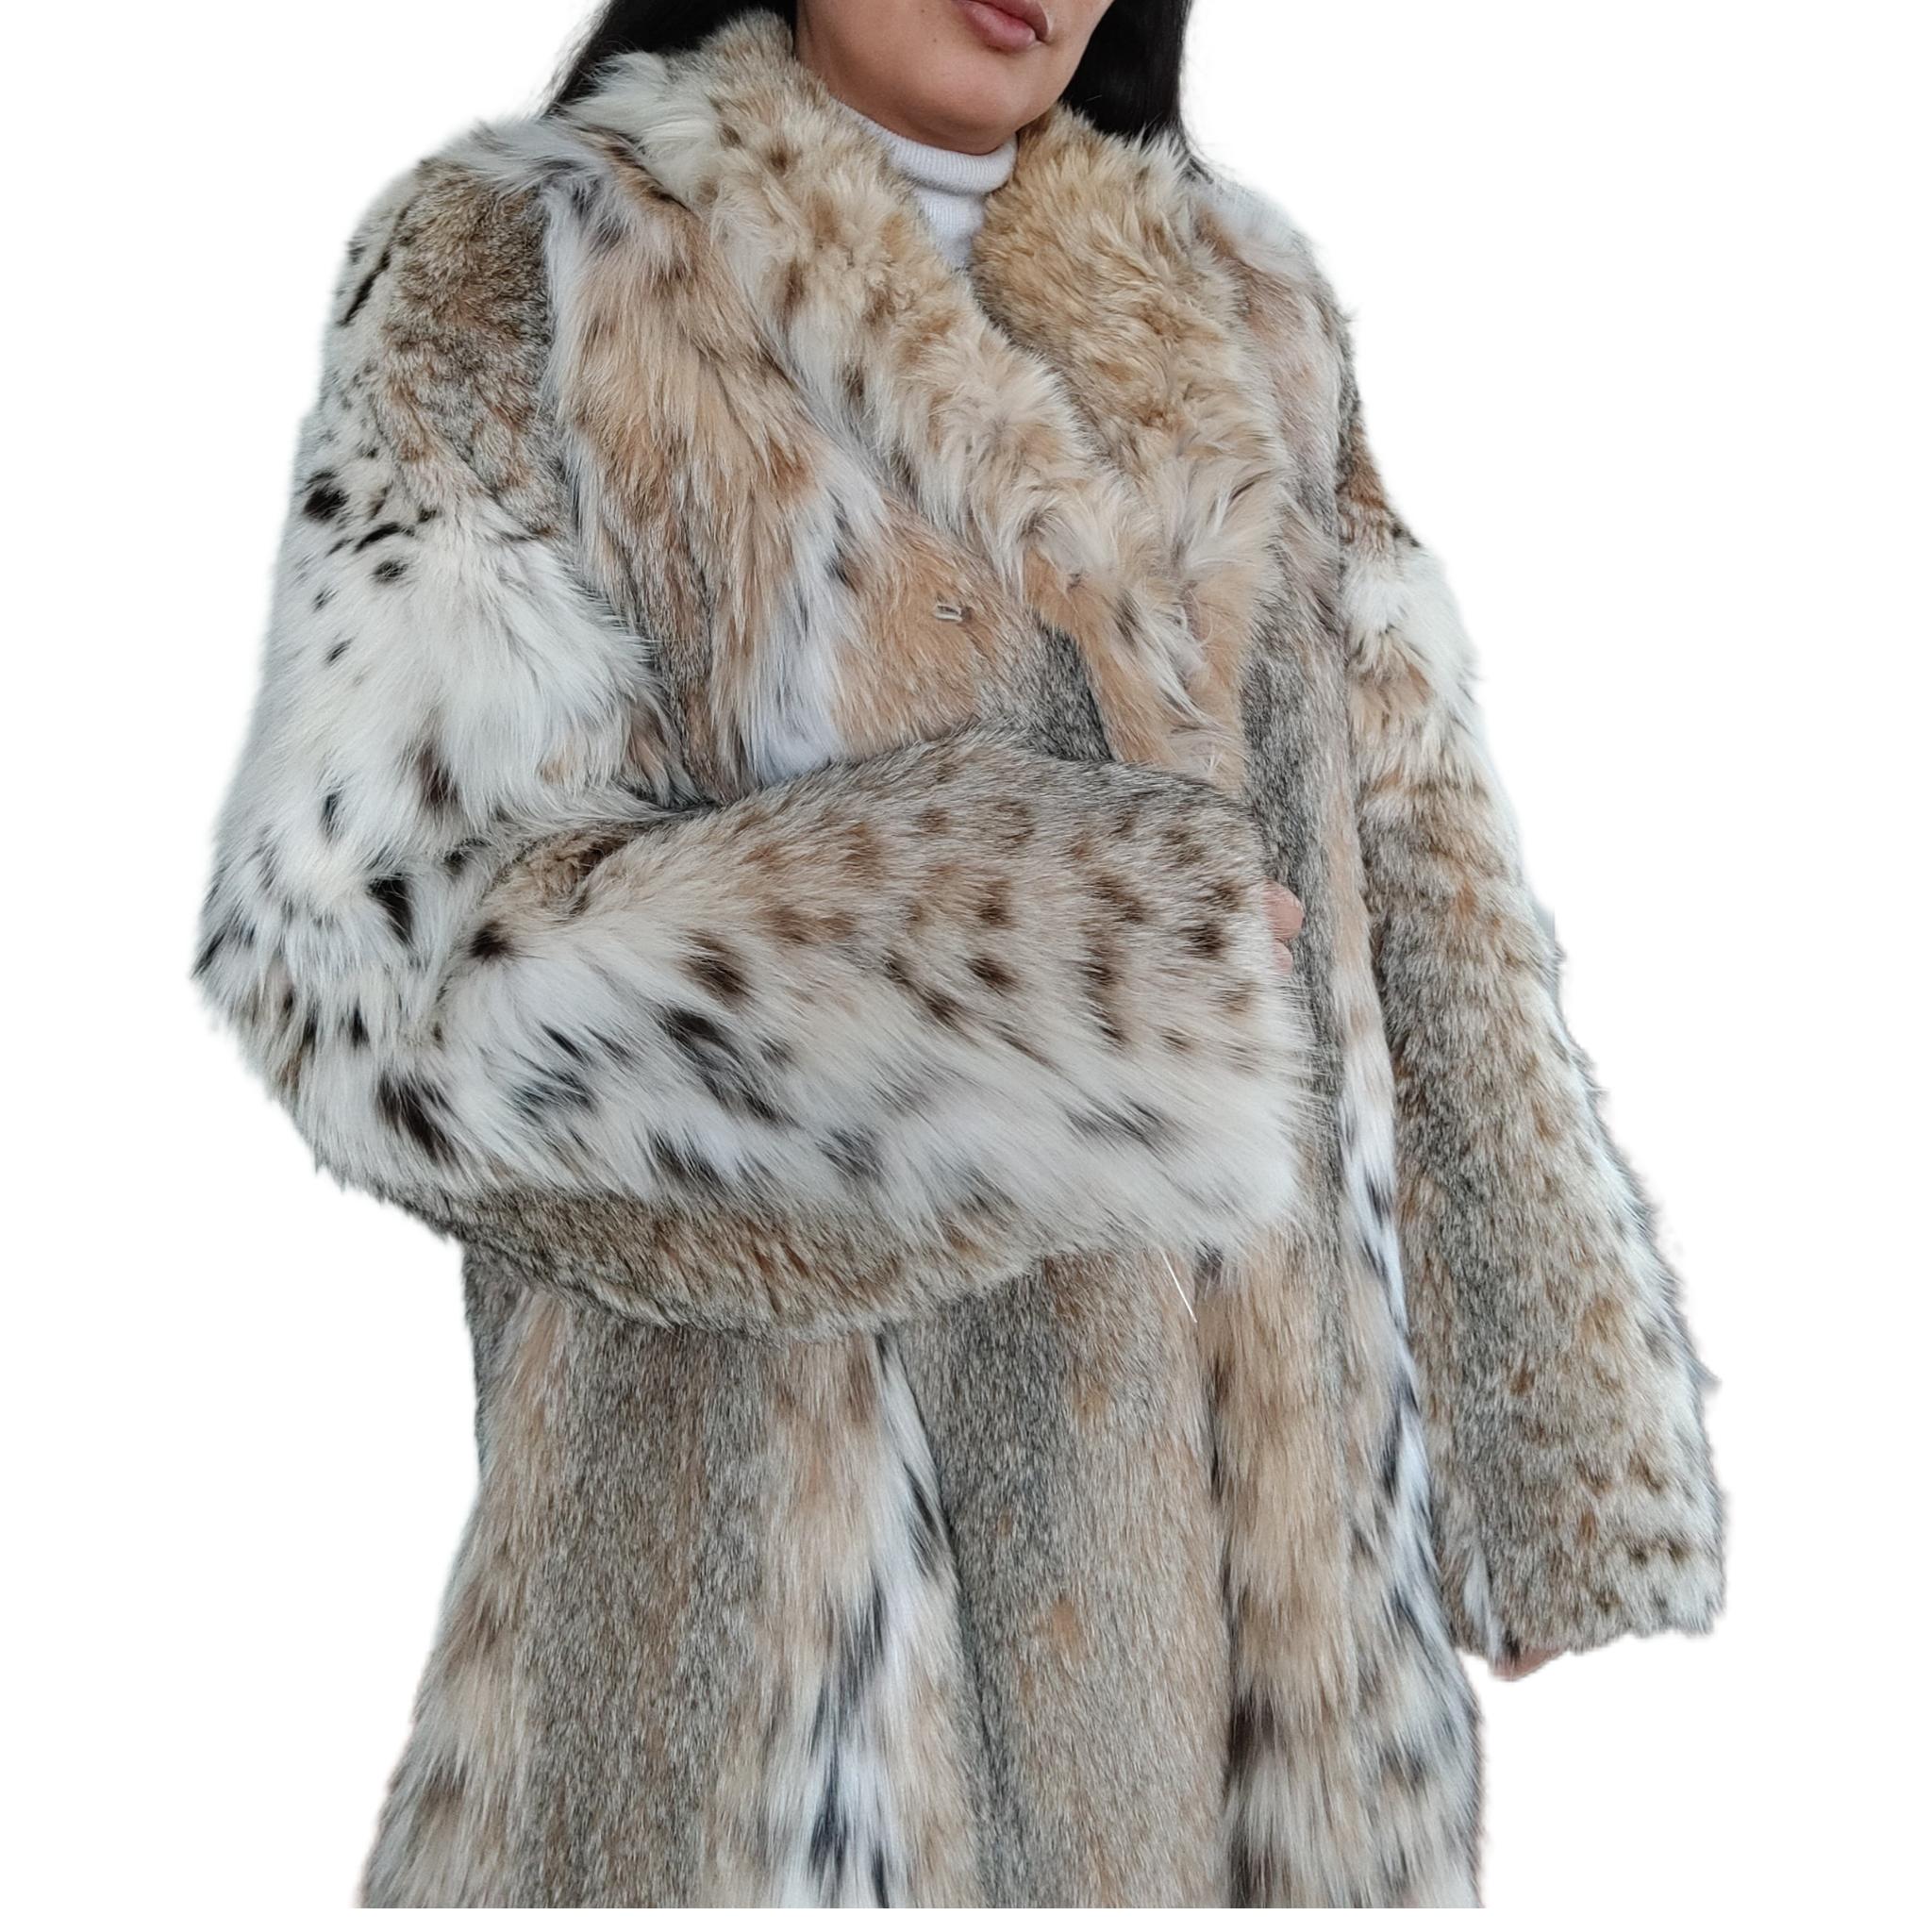 DESCRIPTION : Brand new Canadian lynx fur coat size 14 L

Tailored collar, straight sleeves, supple skins, beautiful fresh fur, european german clasps for closure, too slit pockets, nice big full pelts skins in new equisite condition.

Condition: